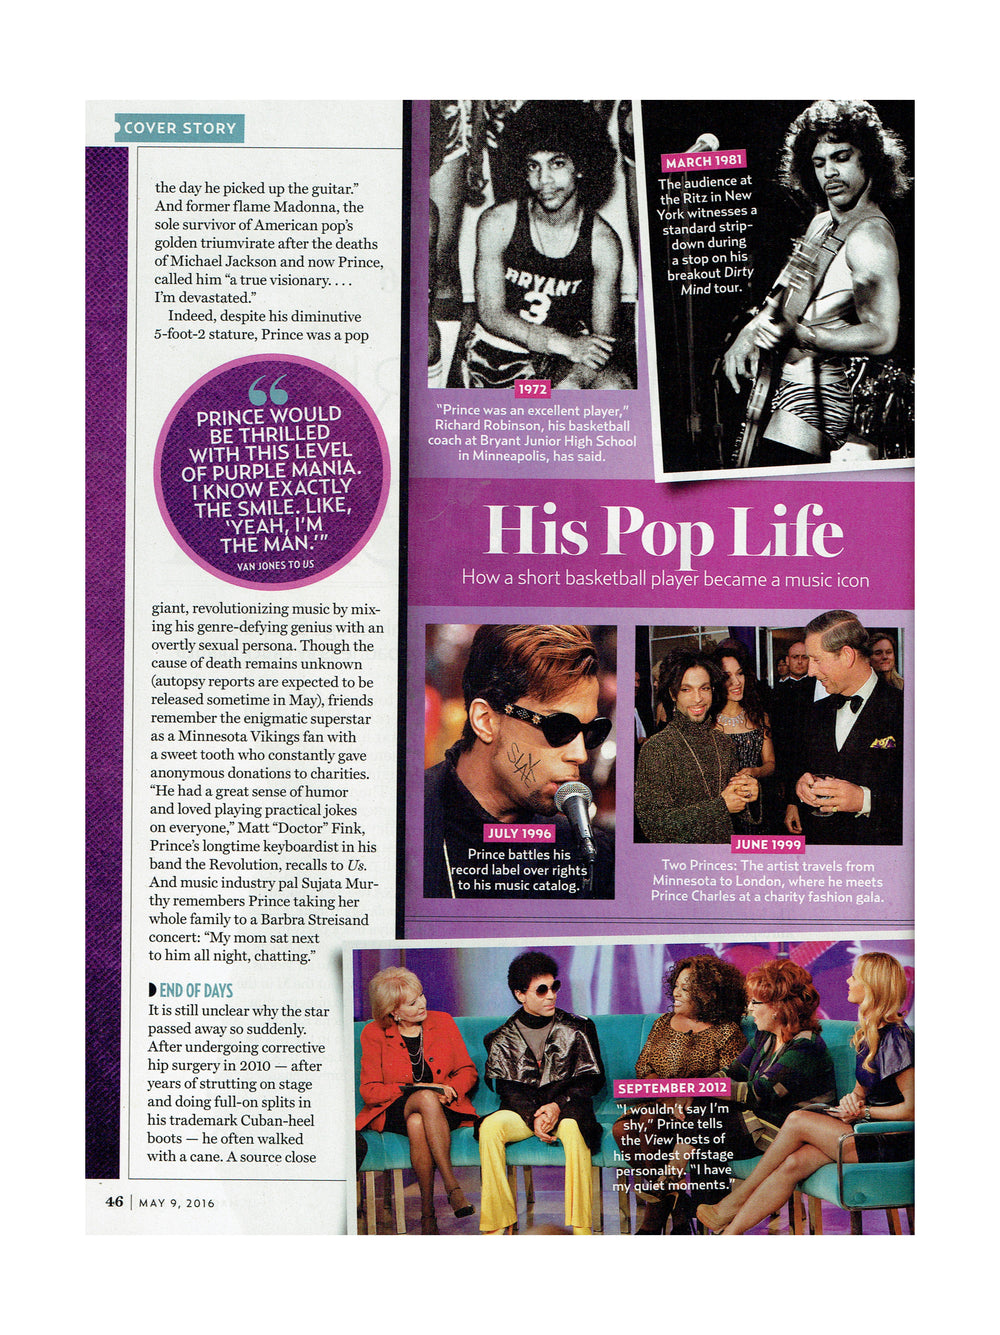 Prince US Weekly Magazine Commemorative May 9th 2016